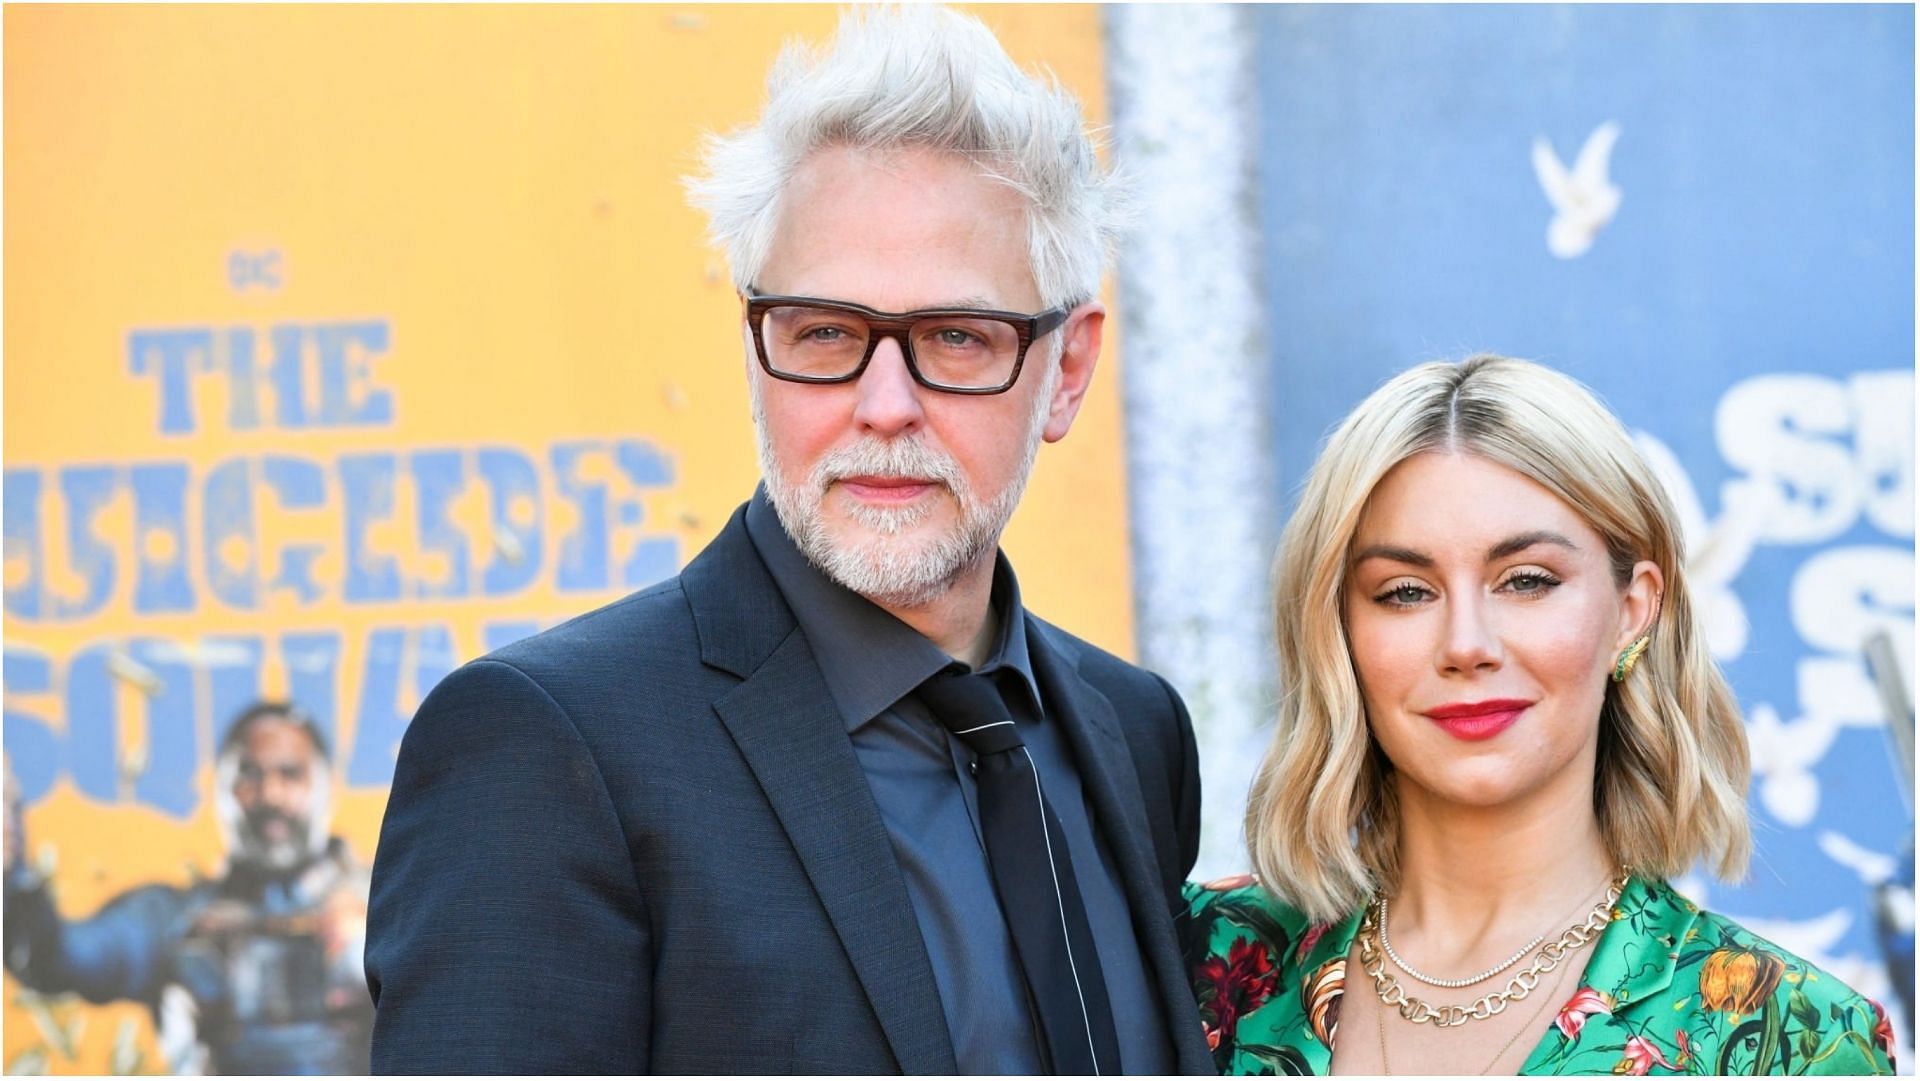 James Gunn and Jennifer Holland recently got married (Image via Rodin Eckenroth/Getty Images)